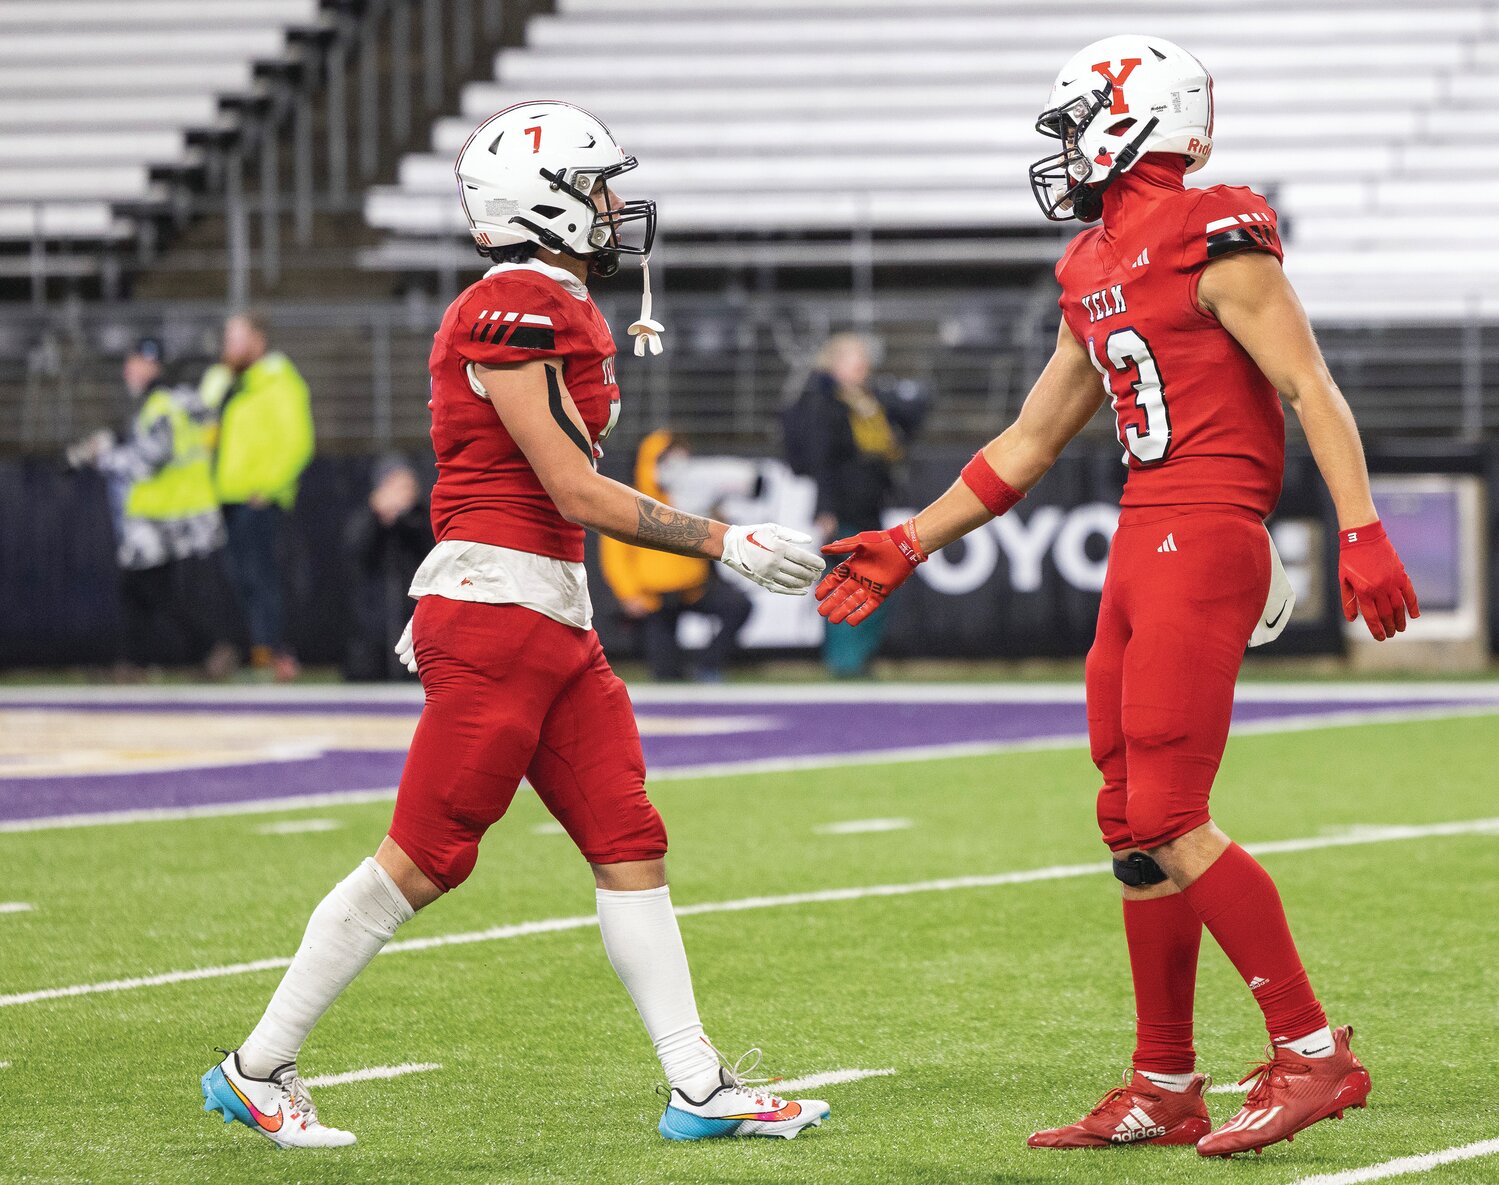 Yelm’s Marius Aalona (7) high fives wide receiver Gio Sanchez (13) during the 3A state championship game at Husky Stadium on Friday, Dec. 1.